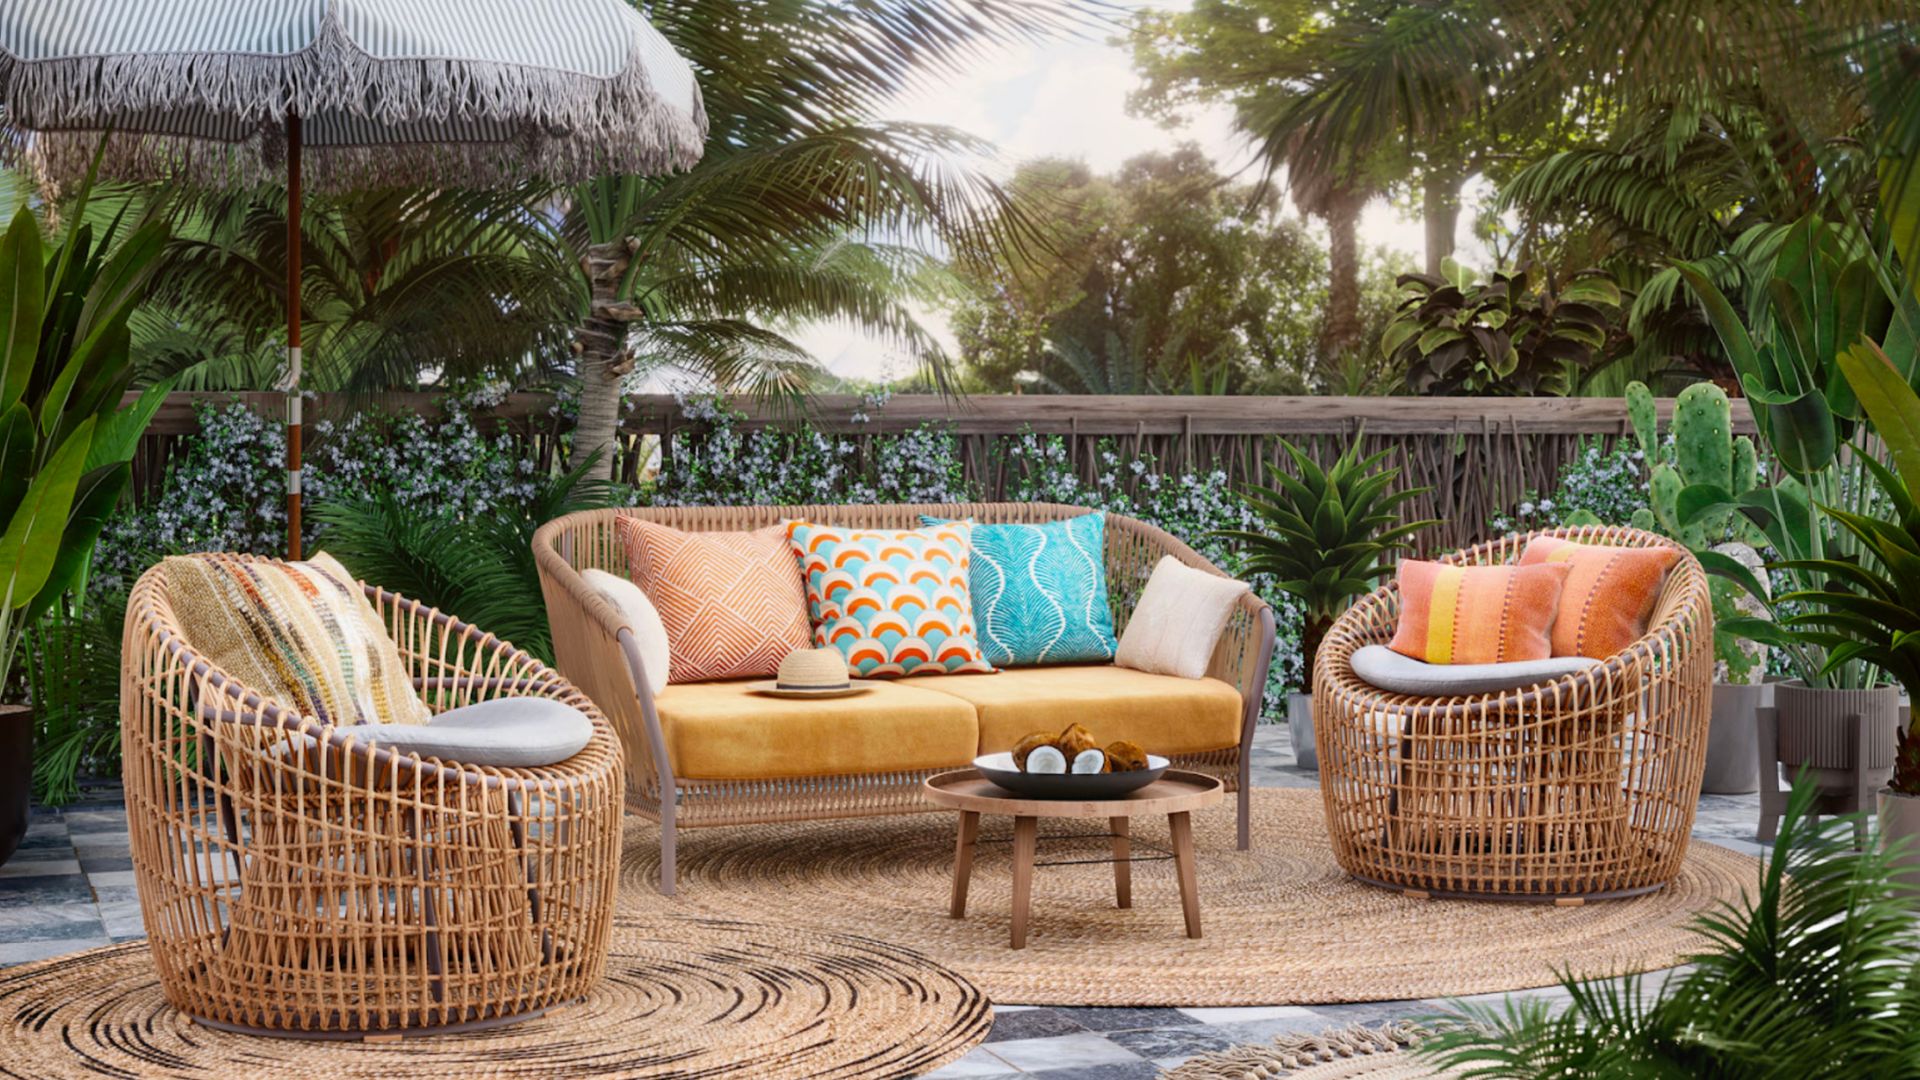 A tropical patio setup with rattan furniture and vibrant cushions, reflecting the lively spirit of summer, ideal for seasonal product range showcases.